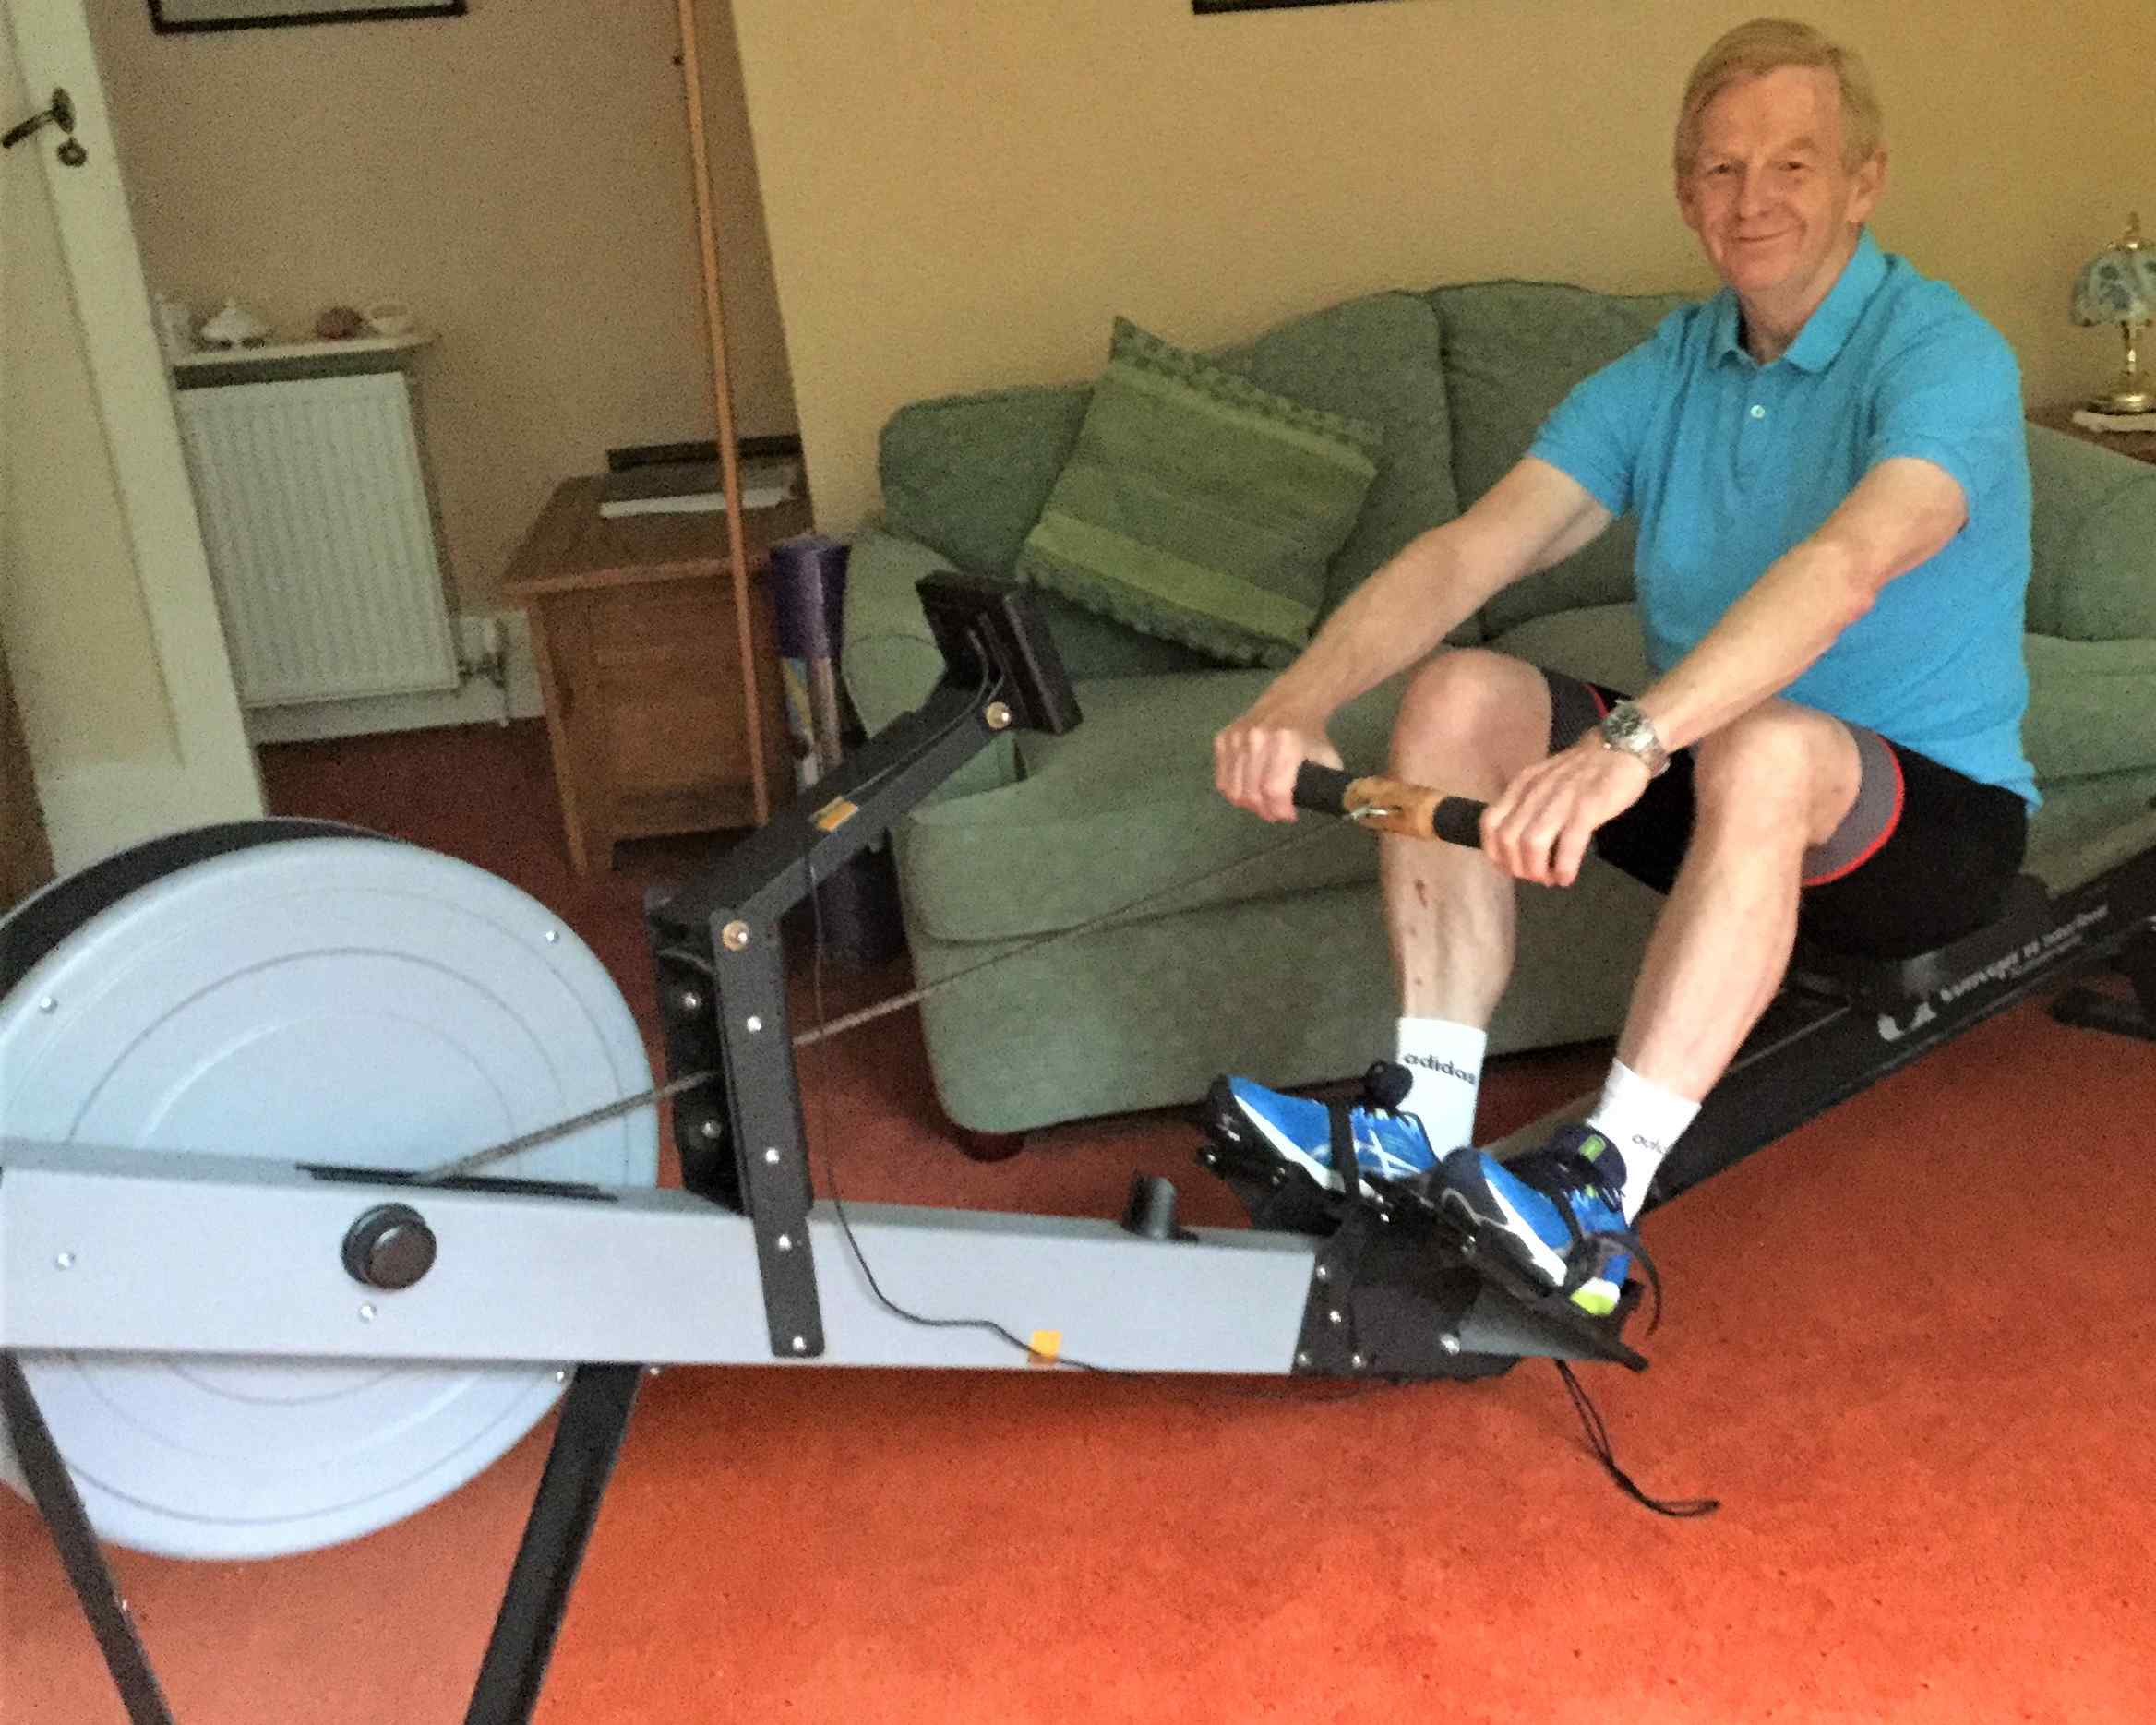 David Russell rows the miles in his living room